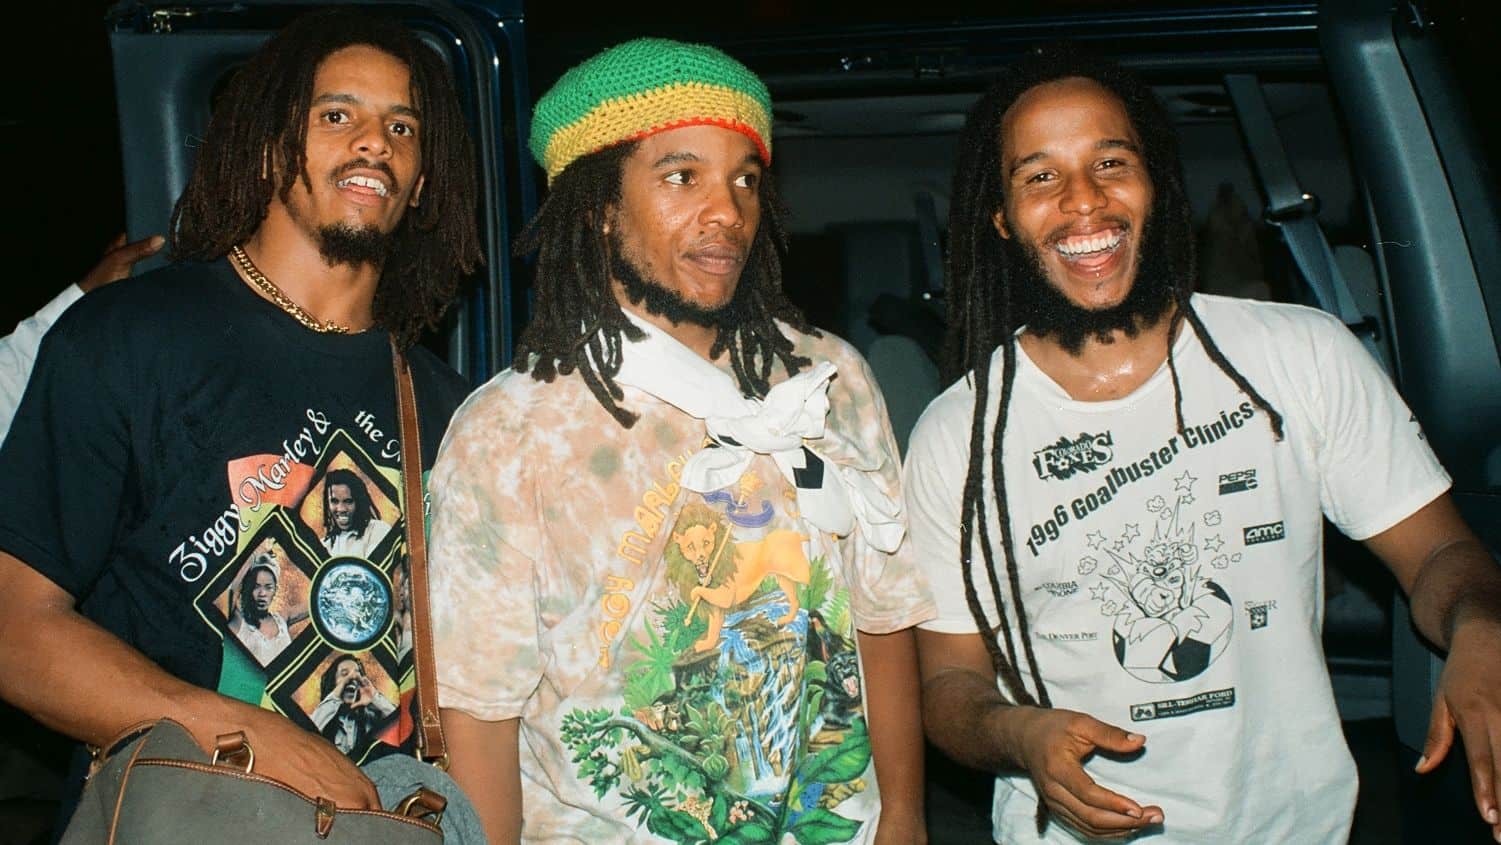 Marley Brothers